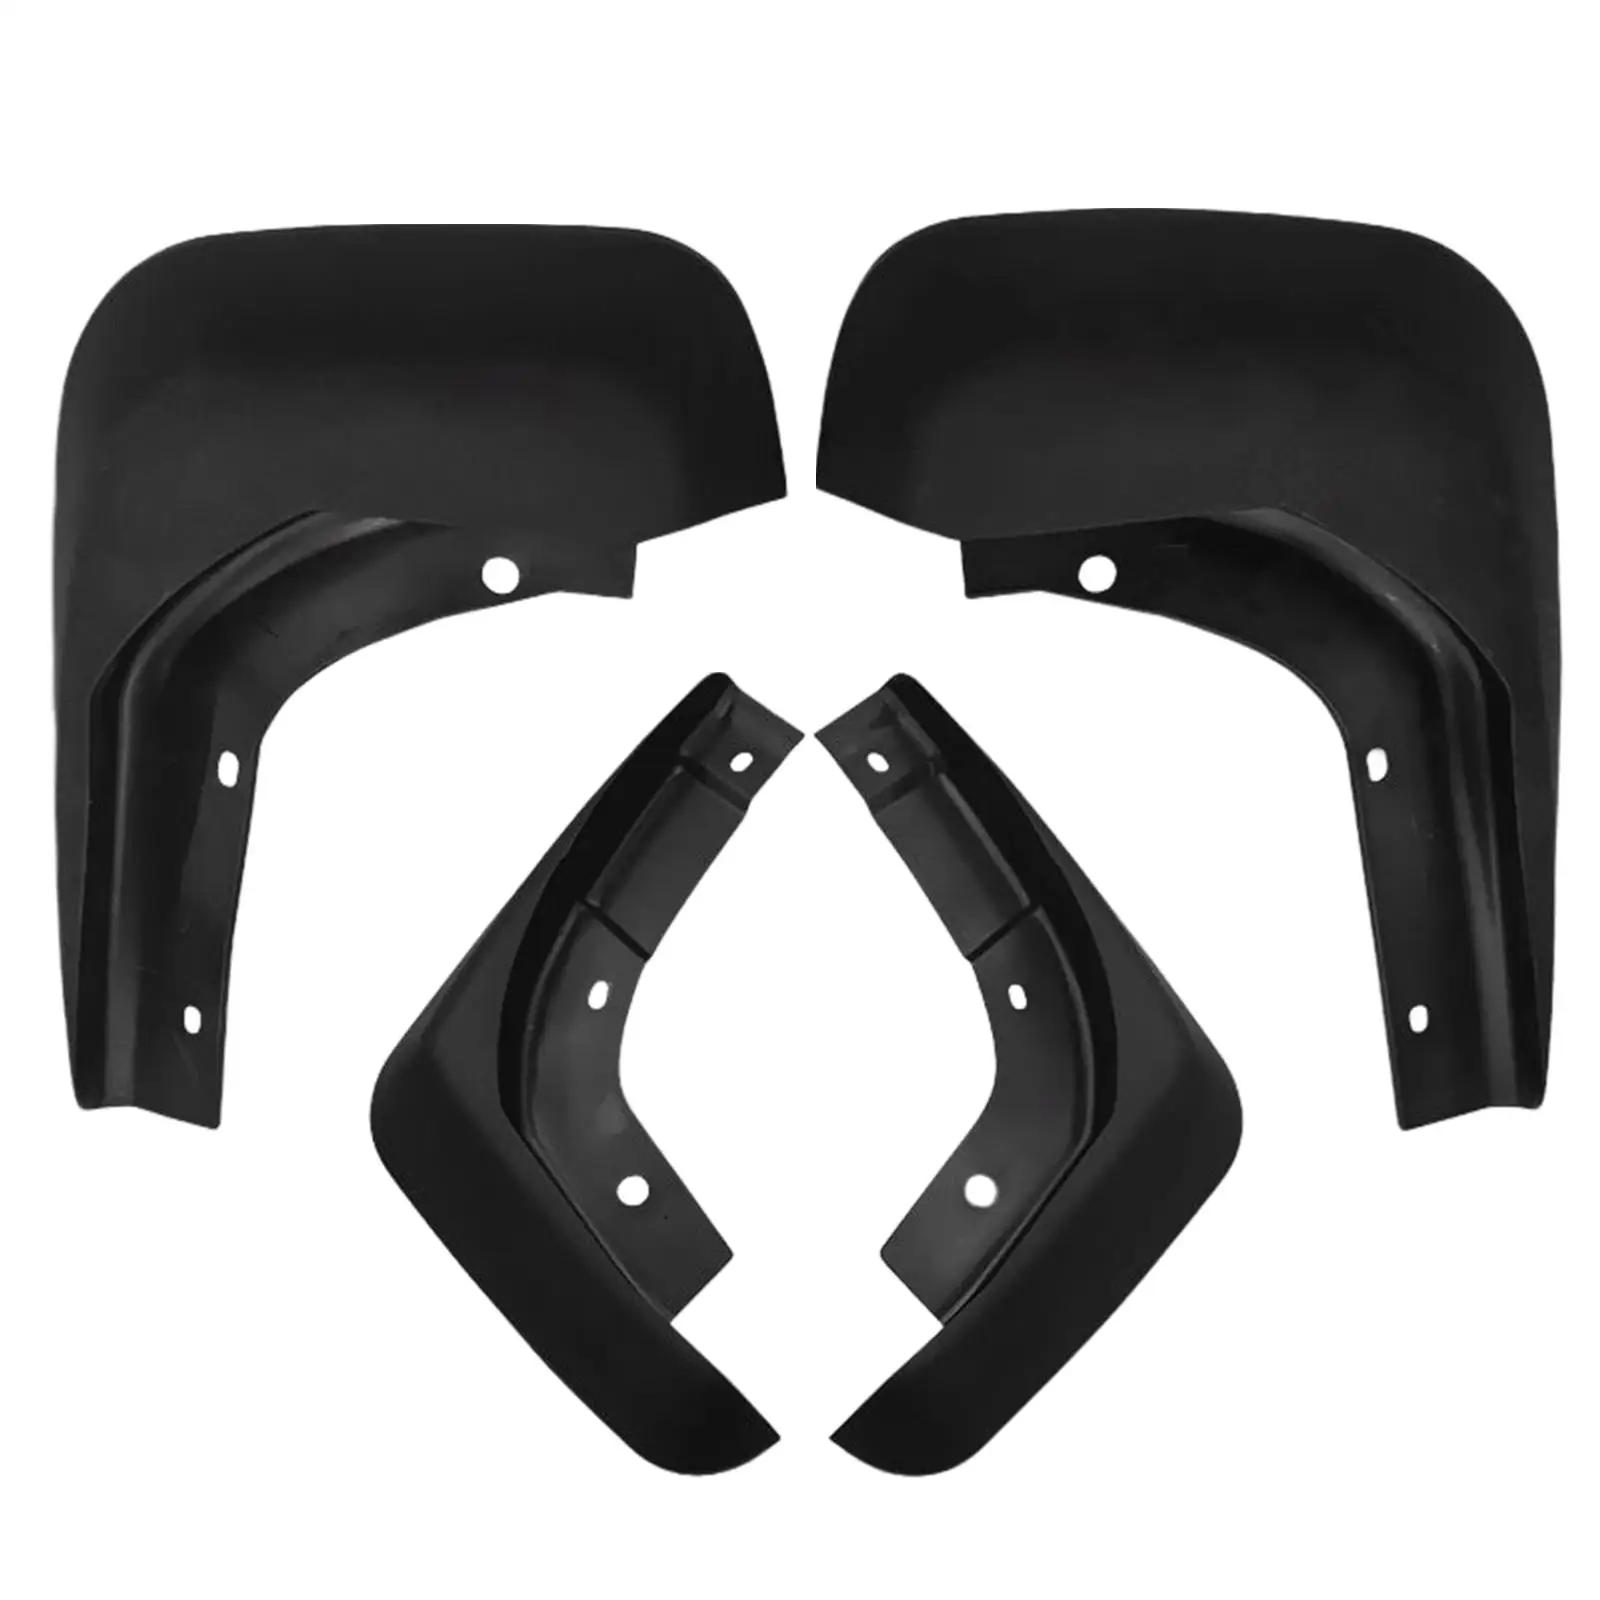 Set of 4 Front Rear Mudguard Kit Flap Mudflap Fit for V60 Replace Spare Parts Easy to Install